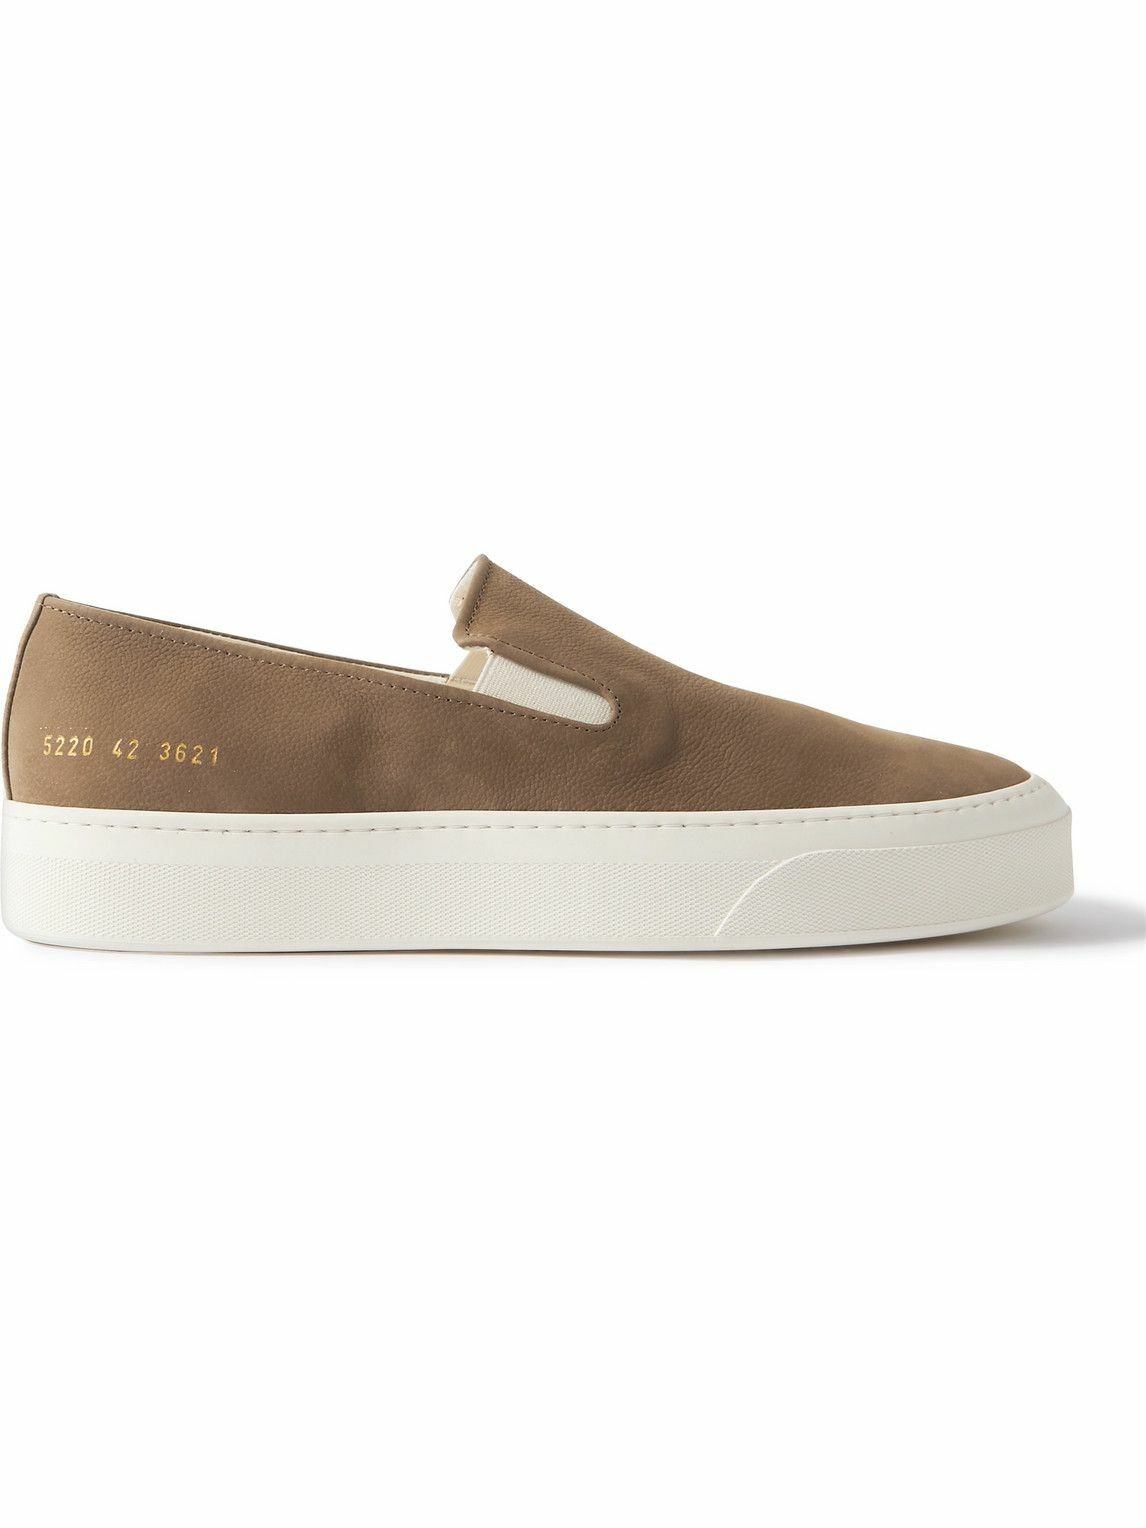 Common Projects - Nubuck Slip-On Sneakers - Brown Common Projects